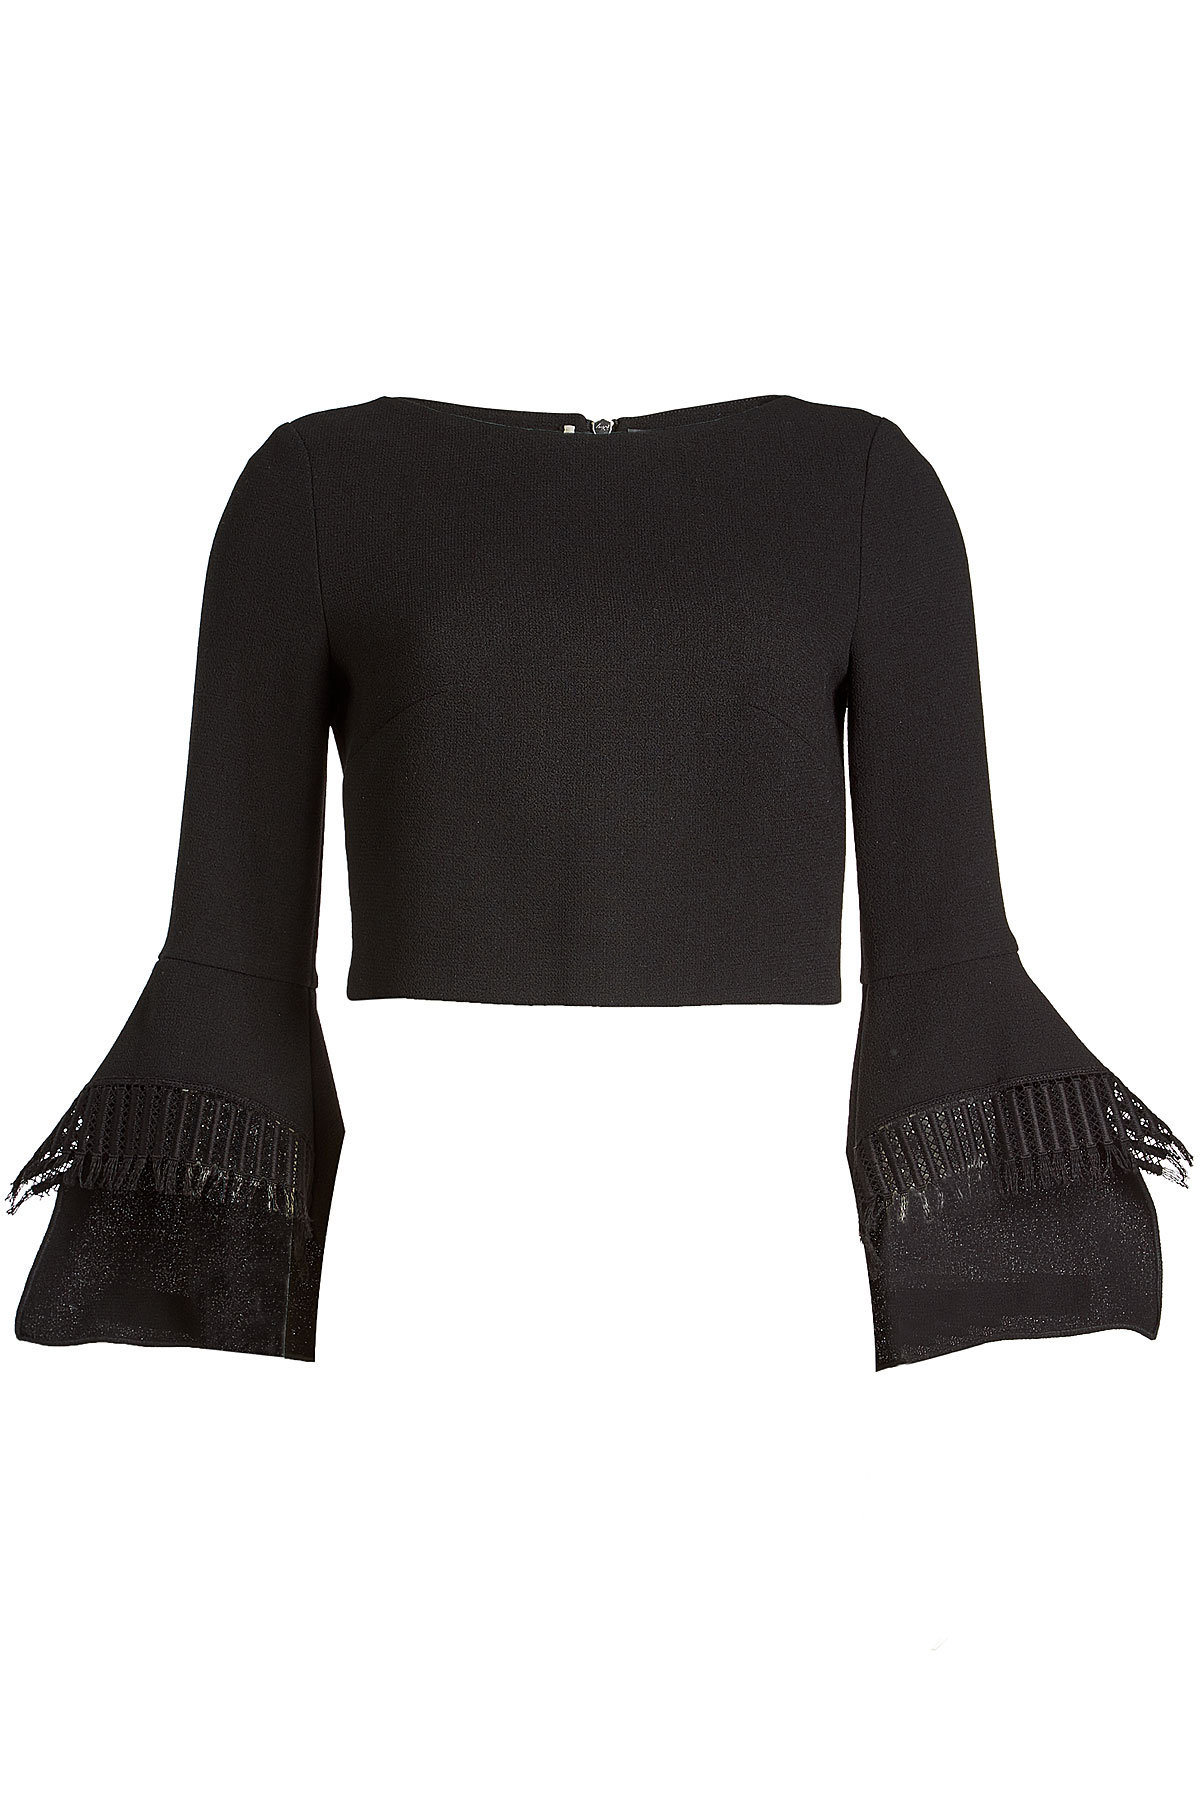 Roland Mouret - Liverton Wool Top with Lace